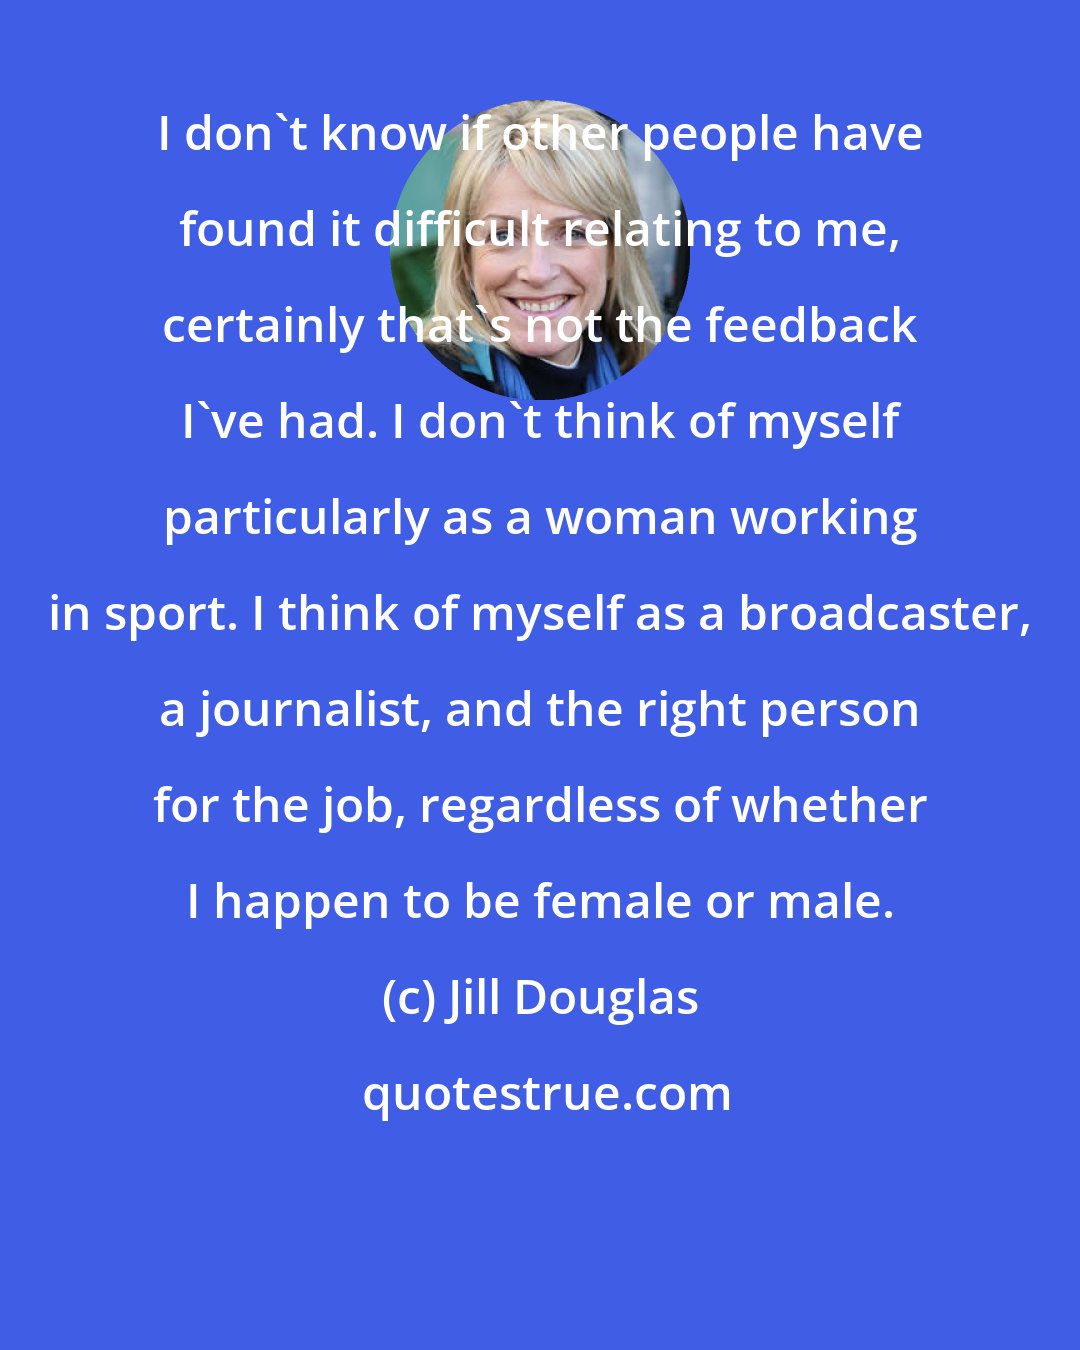 Jill Douglas: I don't know if other people have found it difficult relating to me, certainly that's not the feedback I've had. I don't think of myself particularly as a woman working in sport. I think of myself as a broadcaster, a journalist, and the right person for the job, regardless of whether I happen to be female or male.